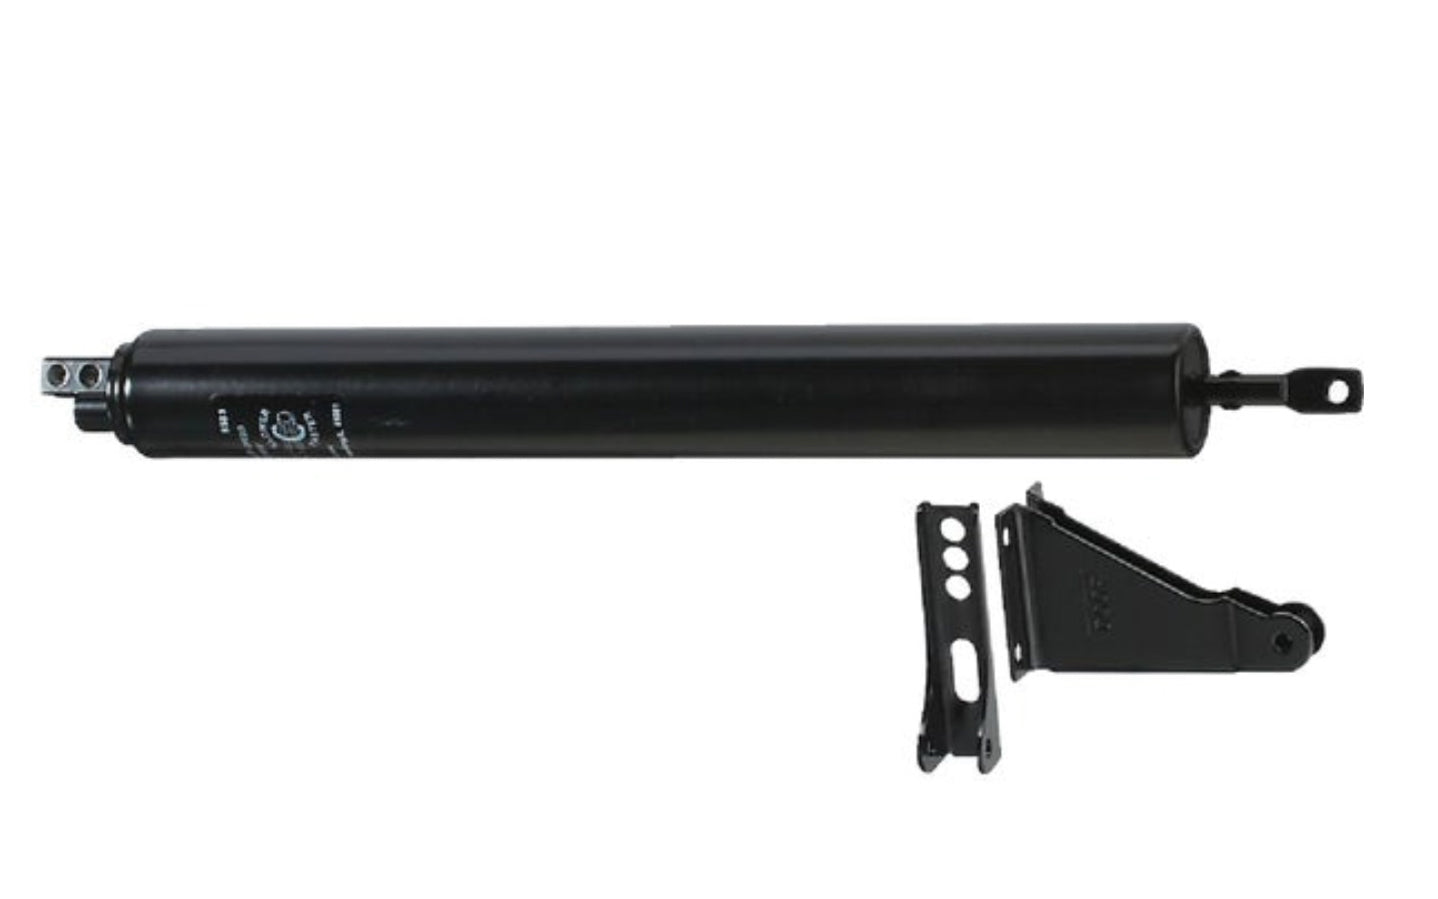 This door closer is designed for wood or metal screen and storm doors and other lightweight doors. Adjustable closing speed. Positive latching assures that the door completely shuts in the latch. Door will swing open approximately 90 deg. Made of steel. 1 per pack. Made by National Hardware. Black Finish